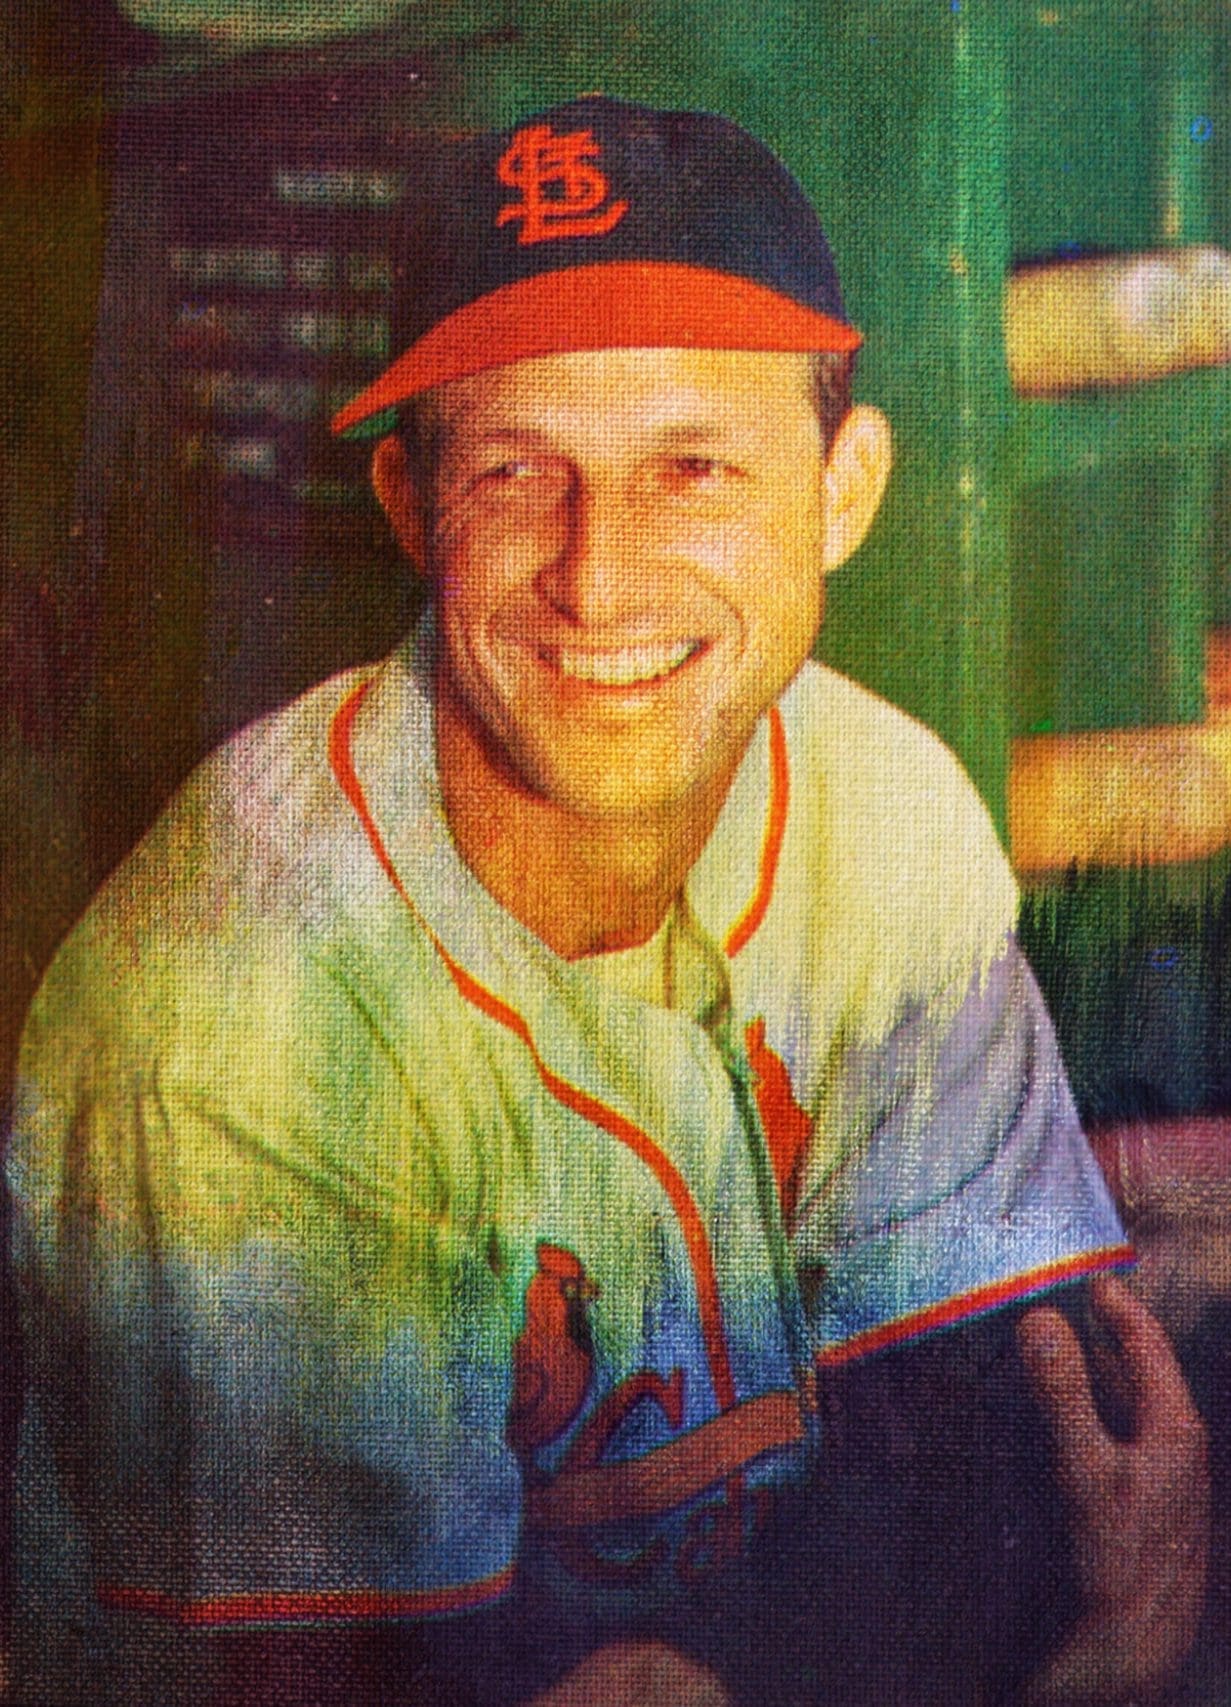 Stan Musial Stats